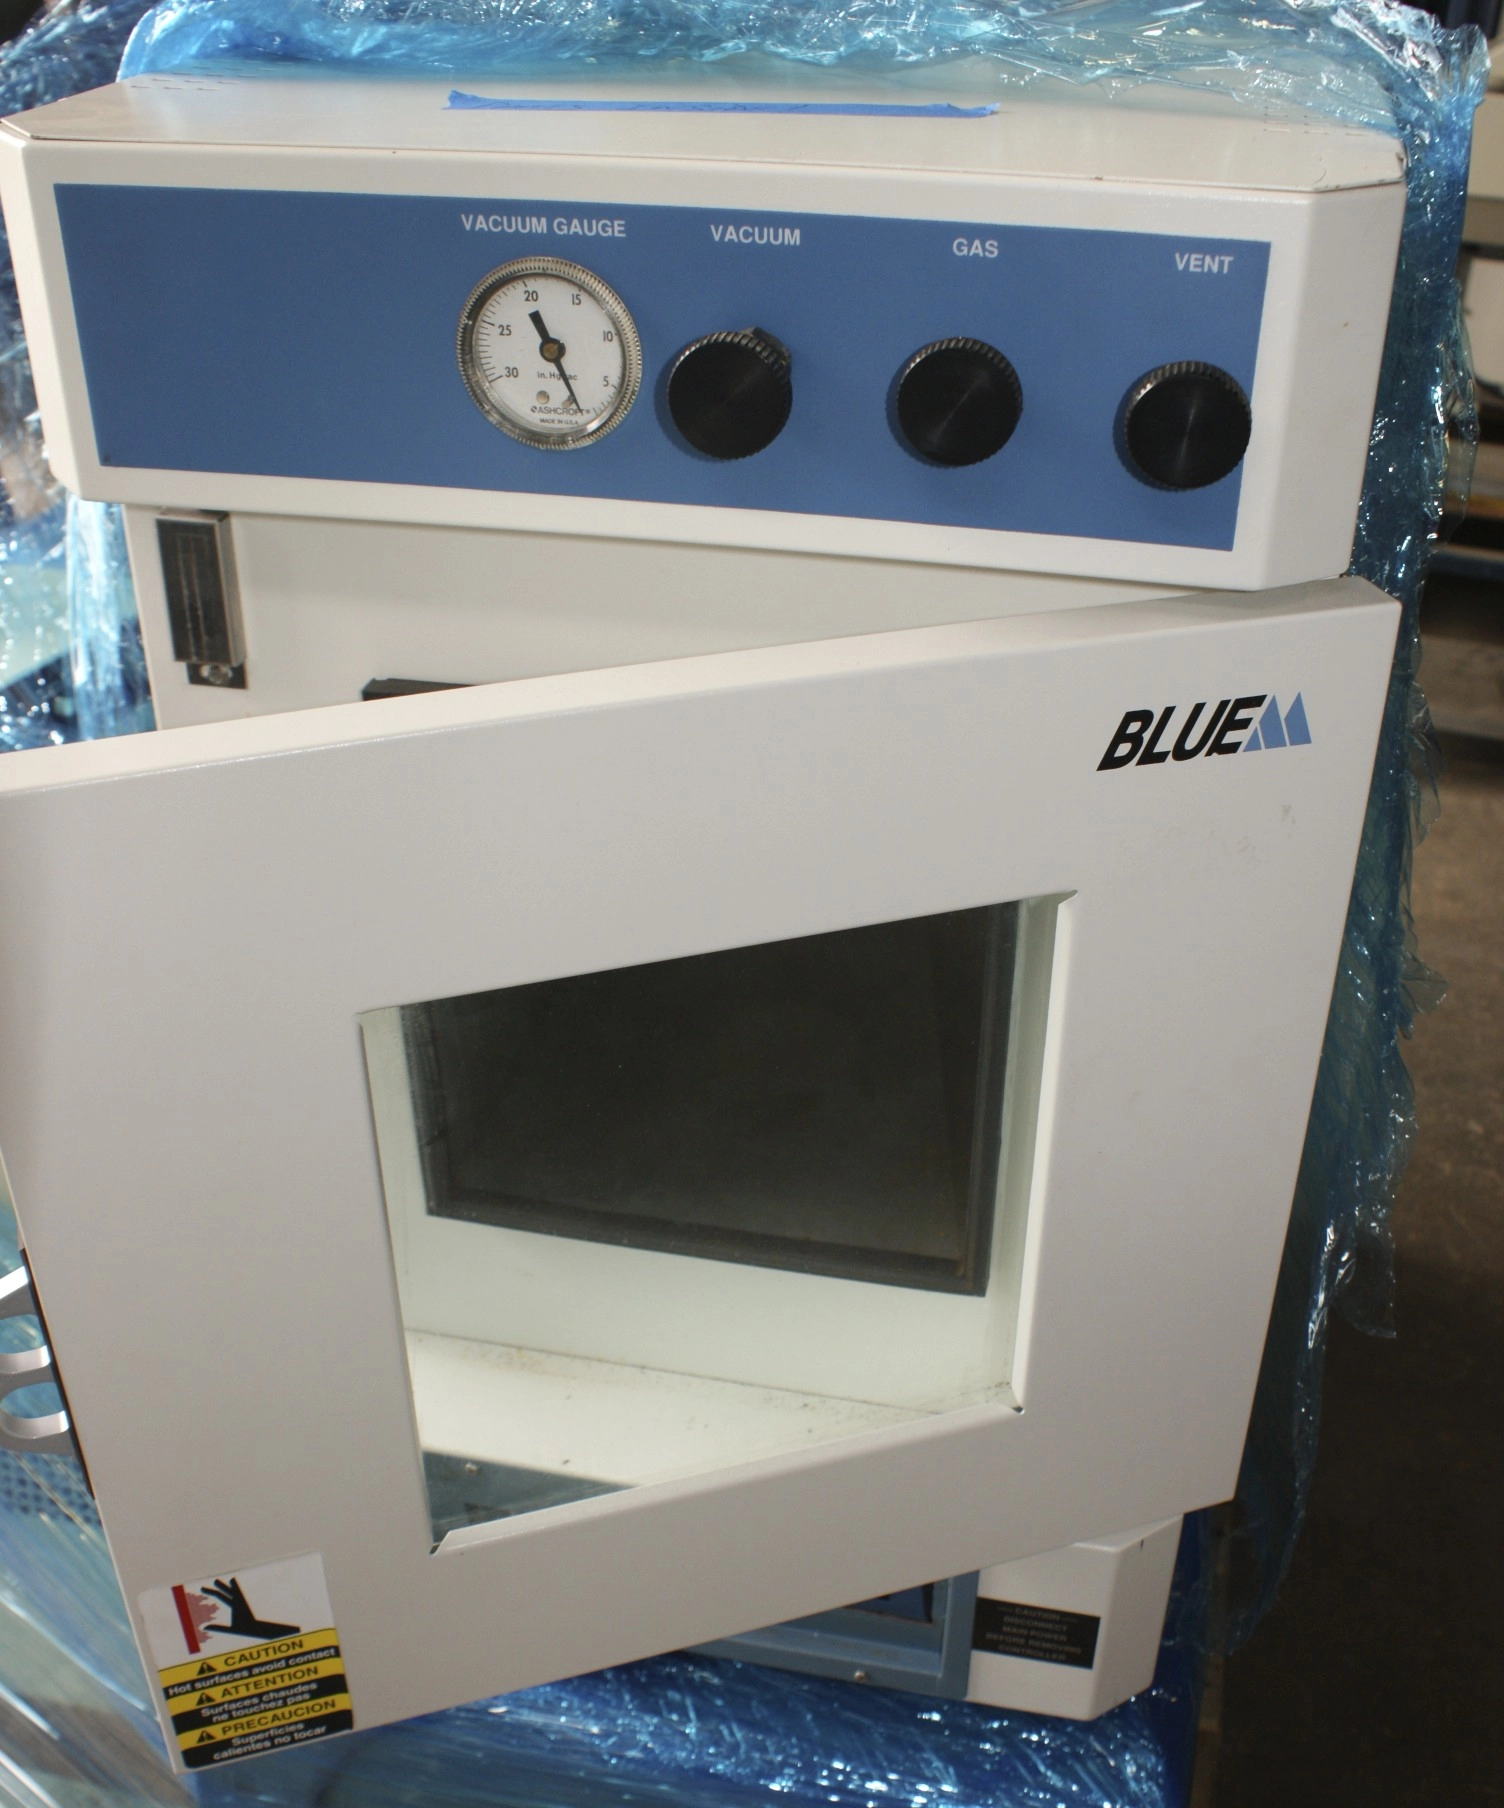 Lindberg Blue M Vacuum Oven Lindberg Vacuum Oven with Microprocessor Control used working nice tested and working when shippe